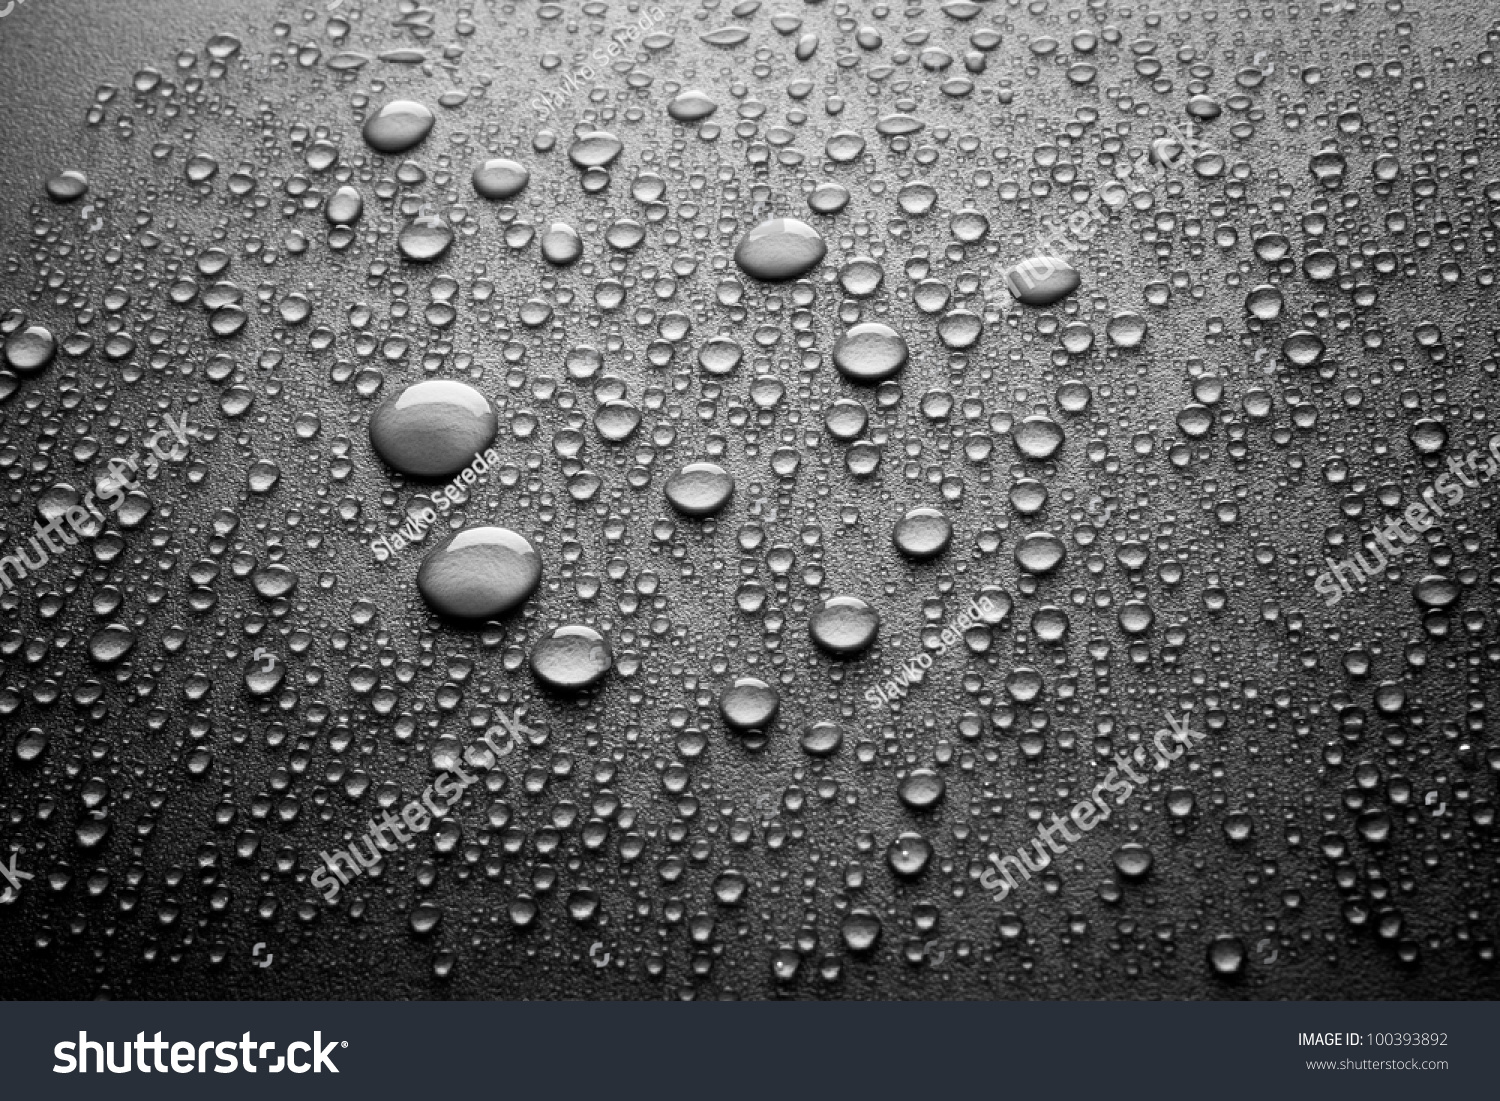 drops of water-repellent surface in black & white #100393892